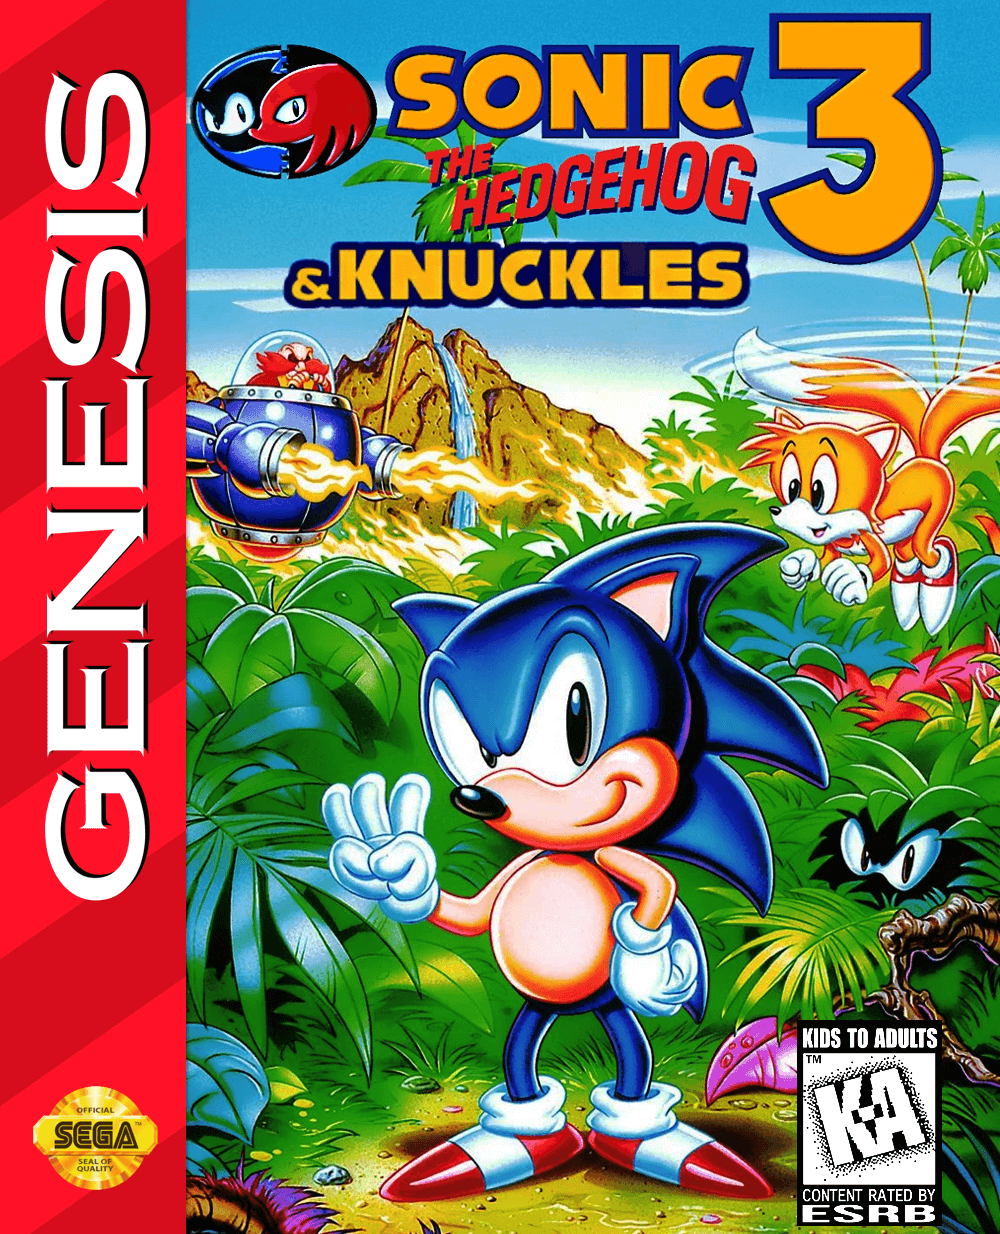 Sonic the Hedgehog 3 & Knuckles - Play game online